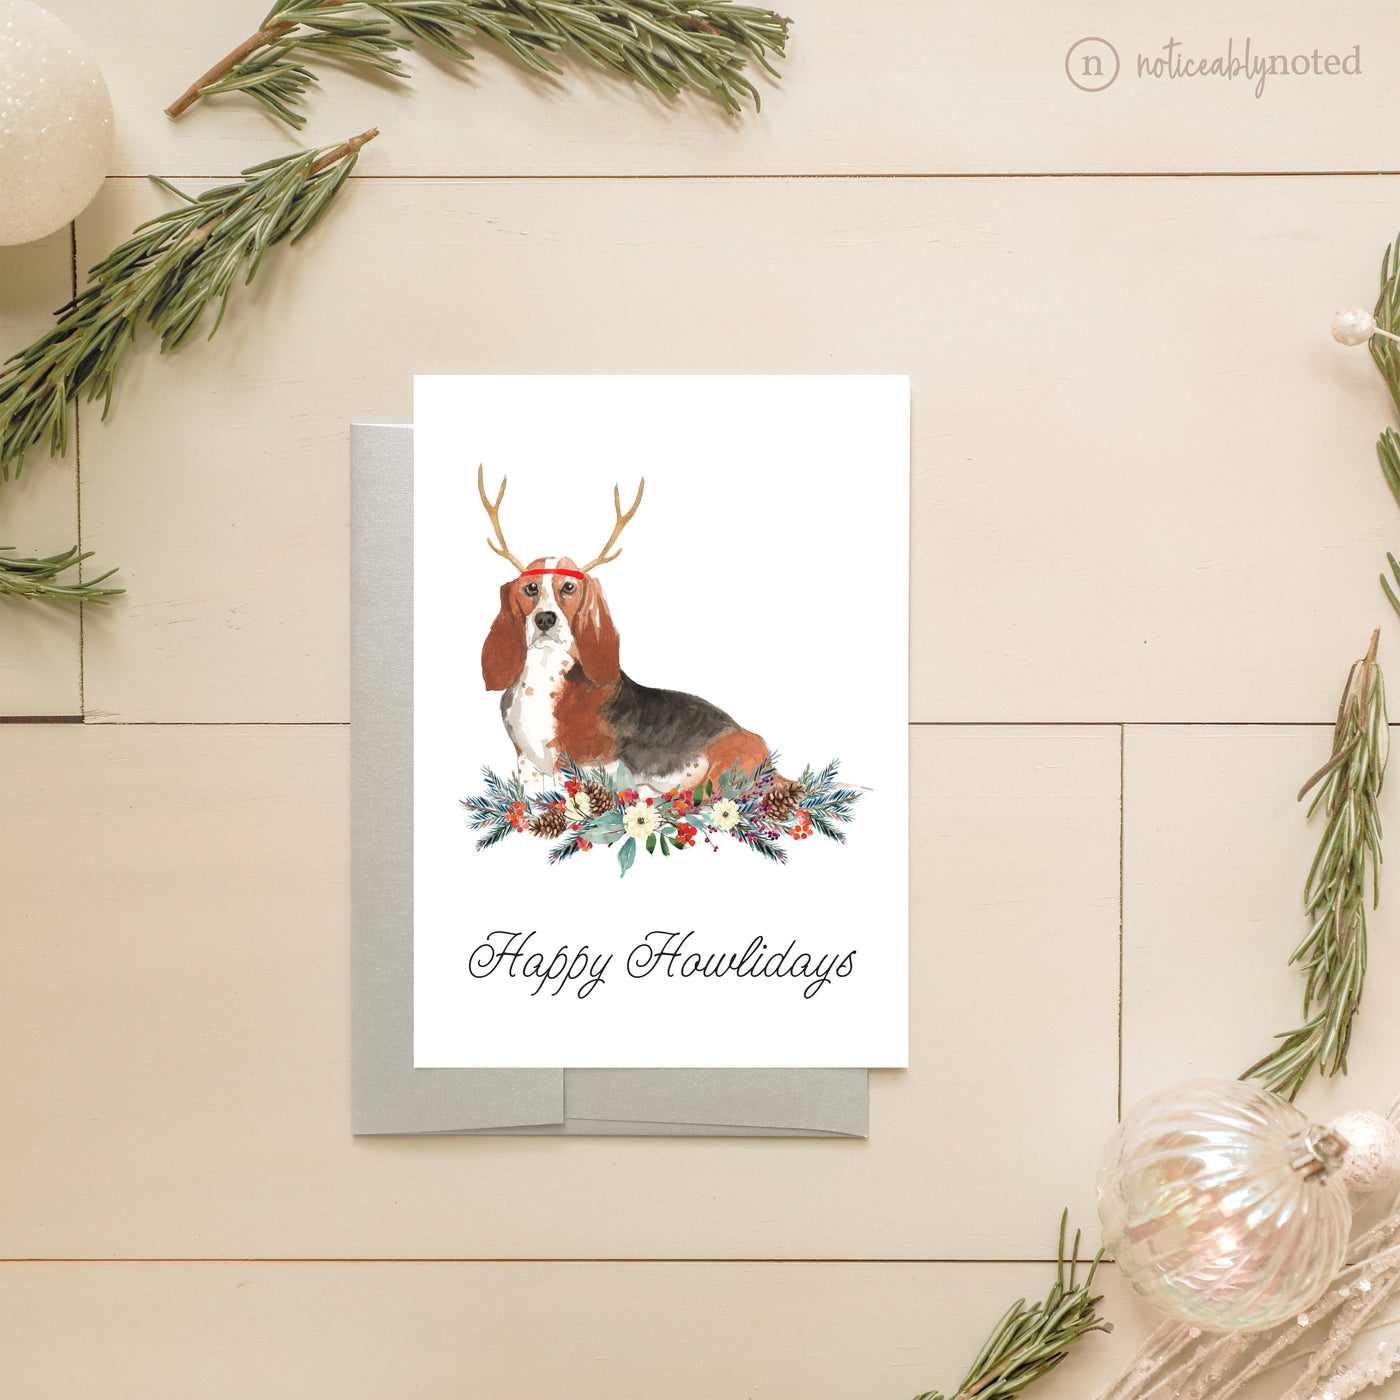 Basset Hound Dog Holiday Card | Noticeably Noted